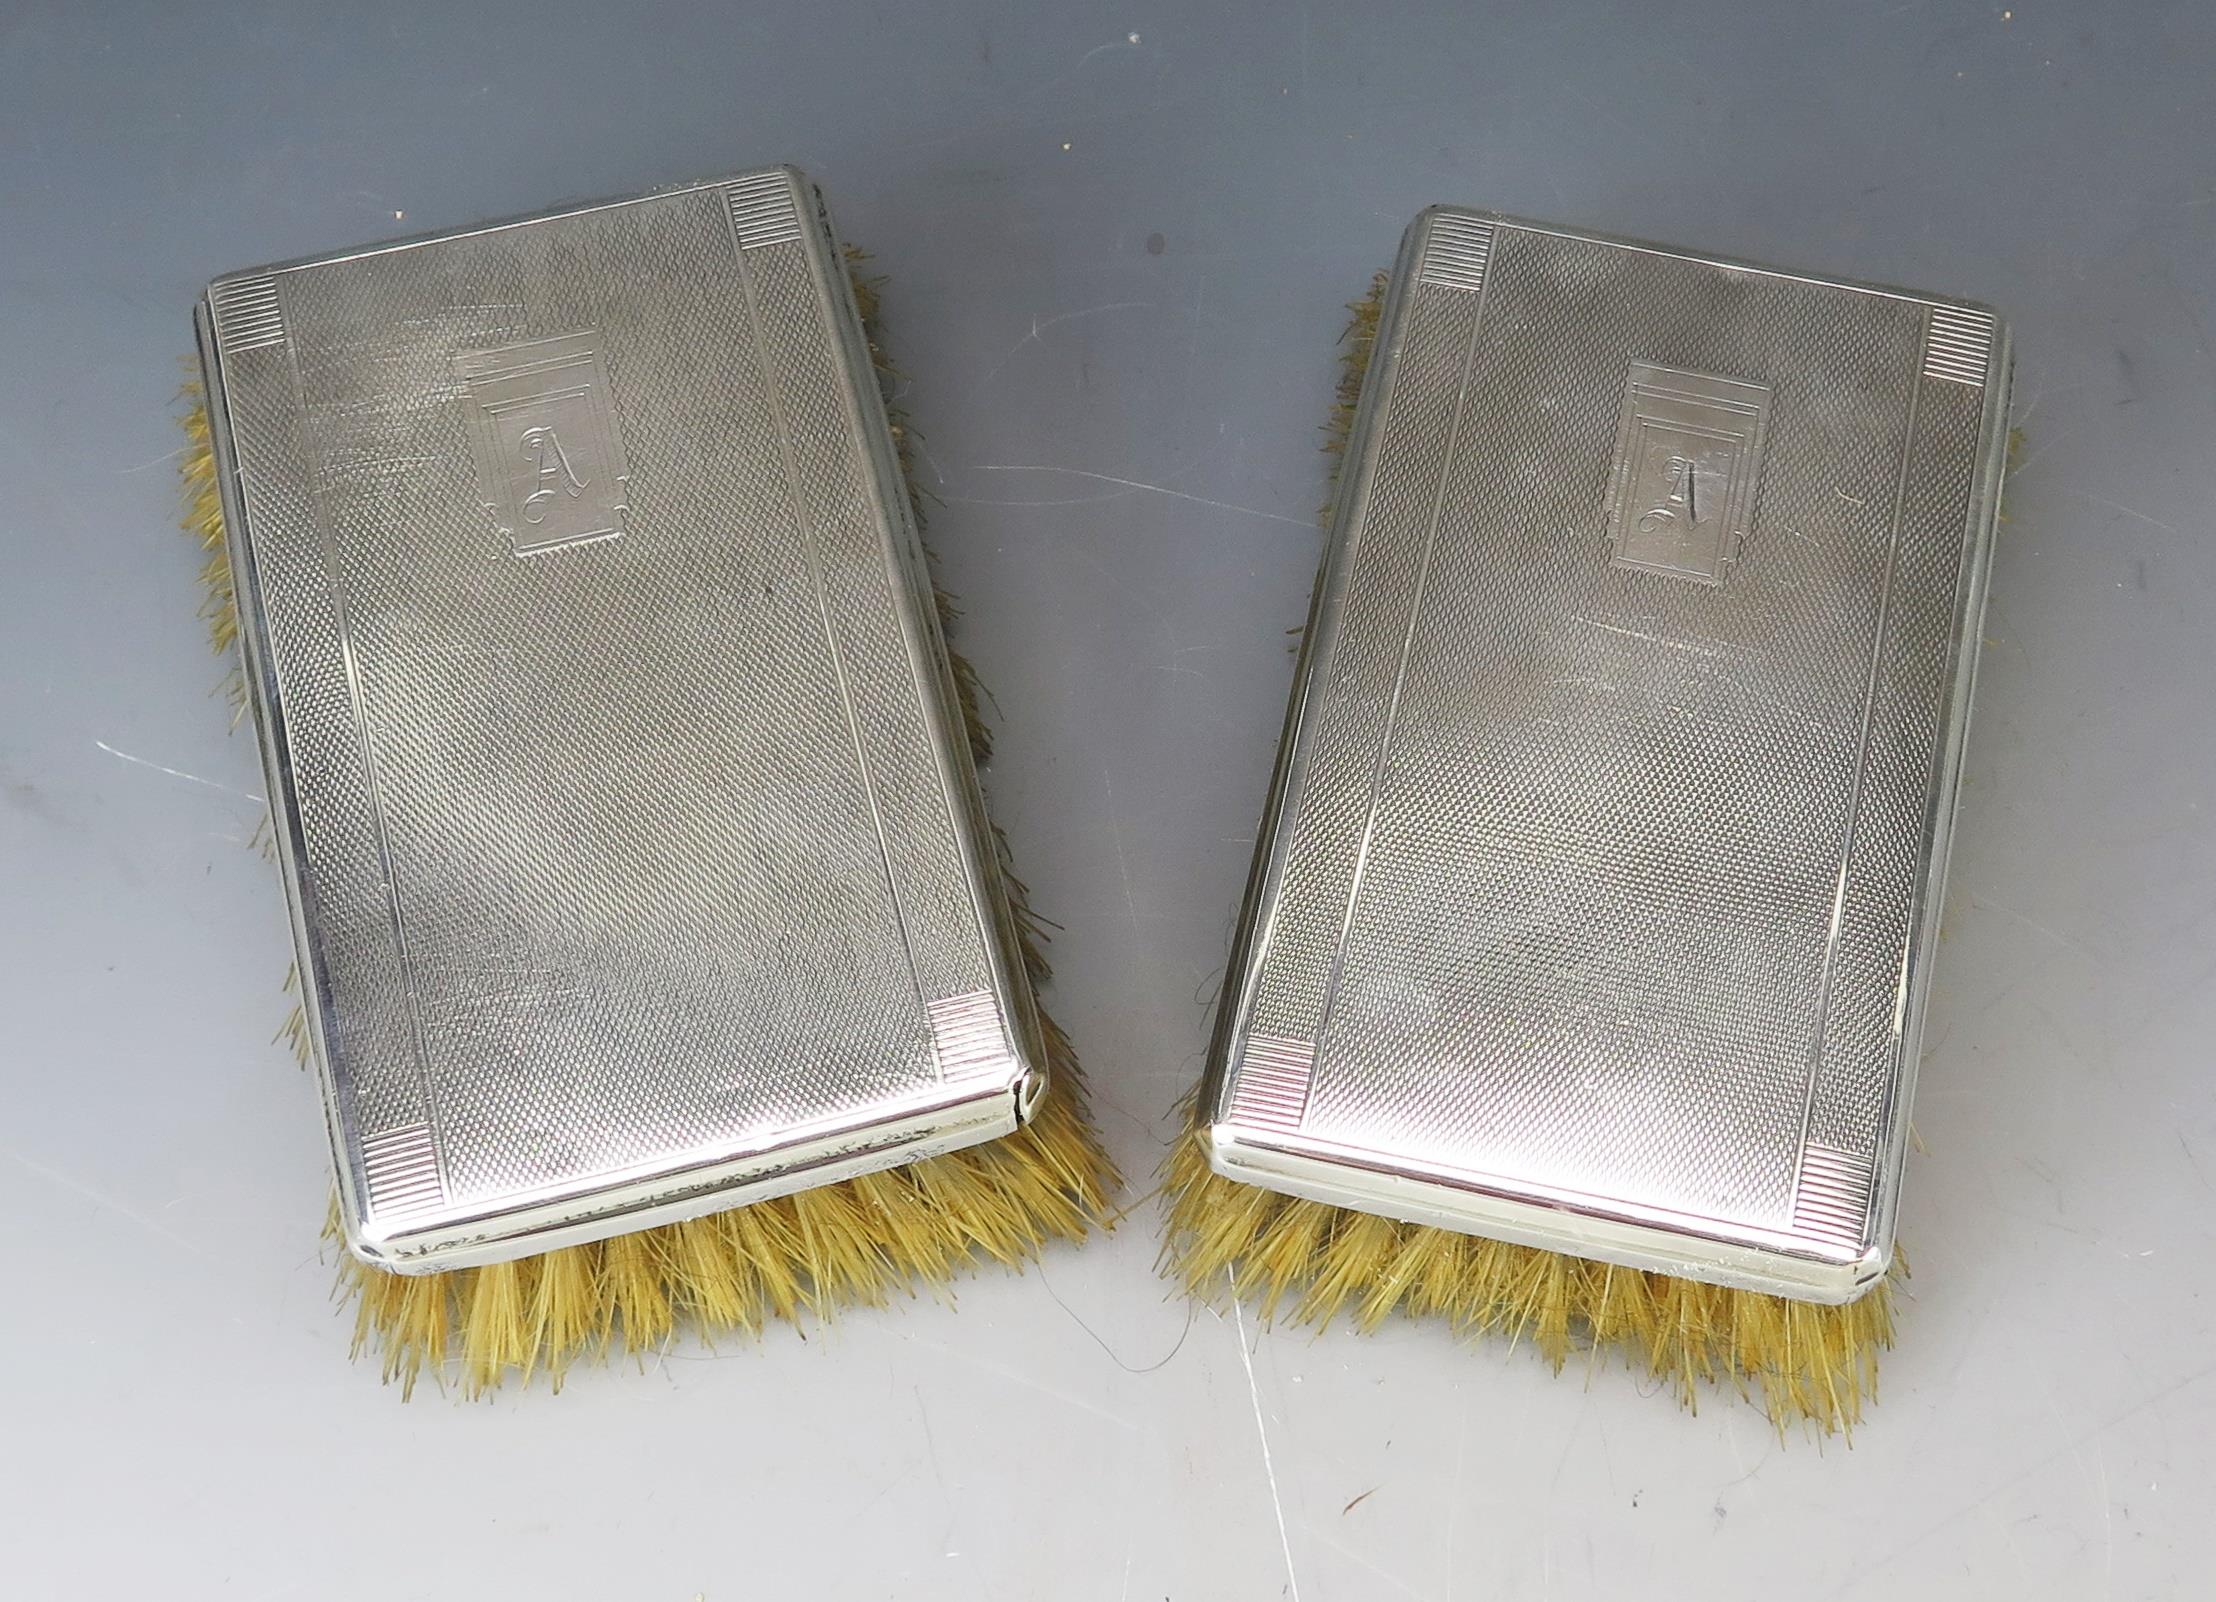 A pair of 20th century silver backed brushes, marks worn, initialled with engine turned decoration.